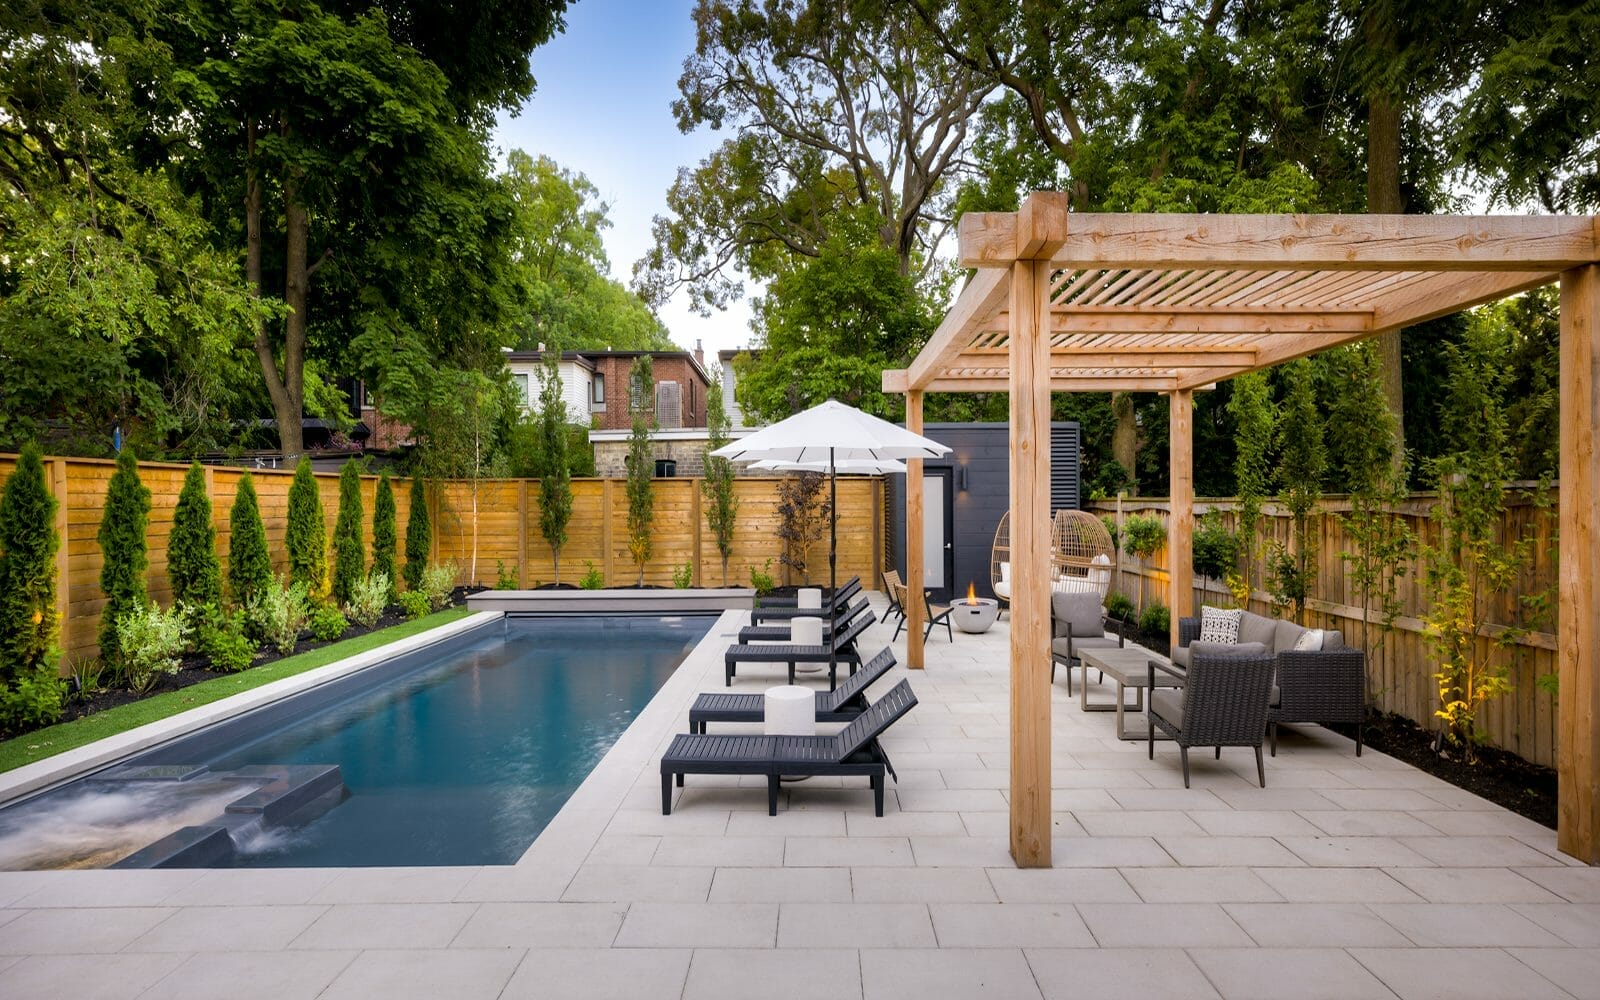 Complete Modern Backyard Landscape Design Project, Featuring, Stone Interlocking, Woodworking Pergola, Fiberglass Pool with Swim Spa, Outdoor Fireplace, Elegant Outdoor Furniture Alongside the Pool, Grey Storage Shed Near the Back of the Property, Privacy Fence, and Small Trees and Shrubs.